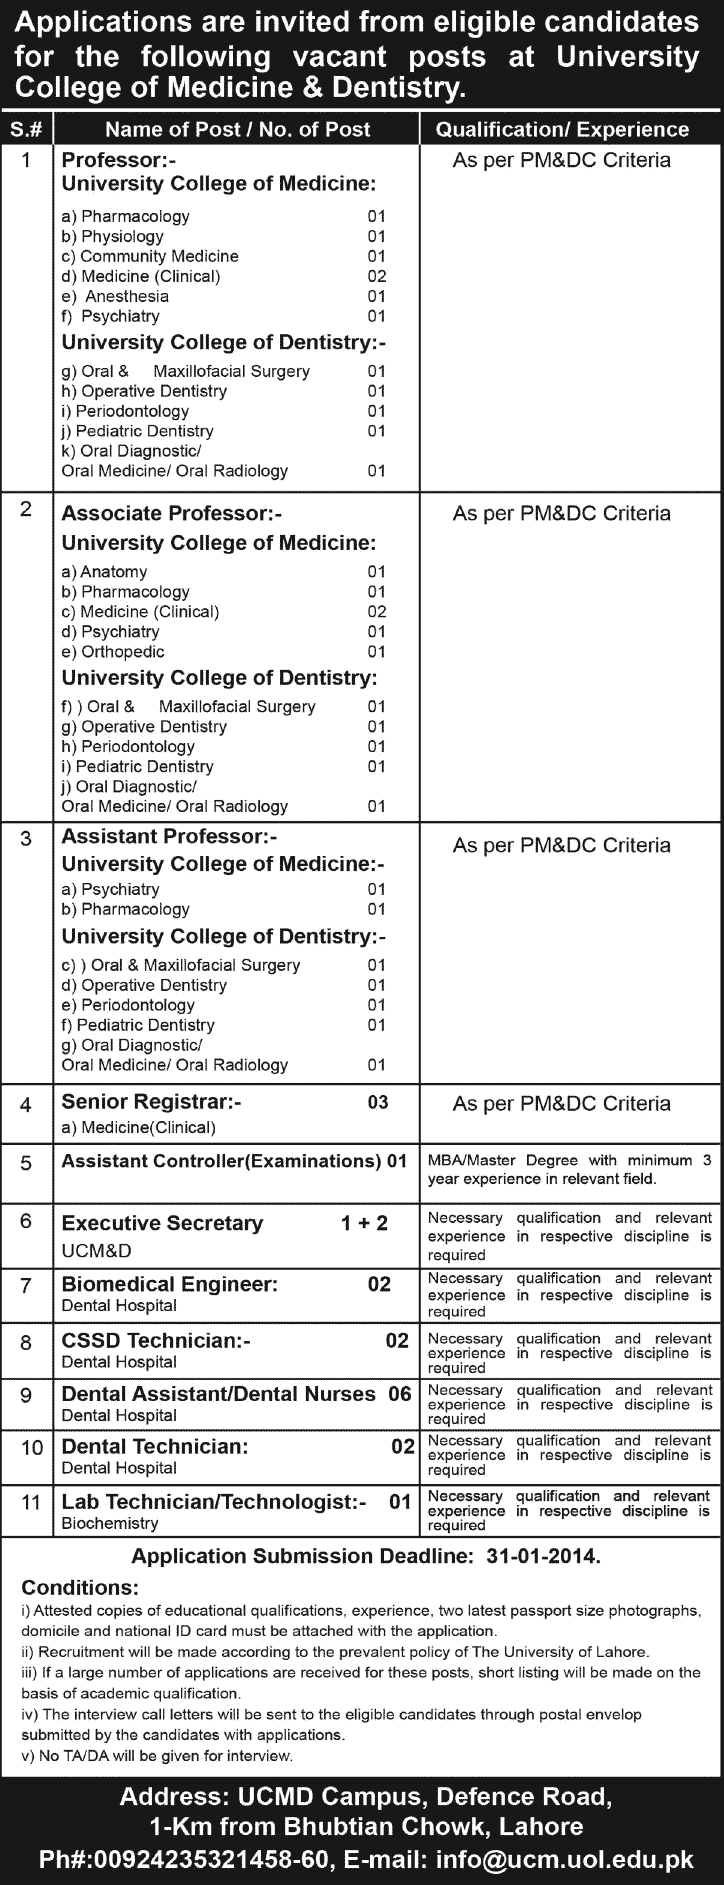 University College of Medicine & Dentistry Lahore Jobs 2014 for Teaching Faculty, Administrative Staff & Technicians